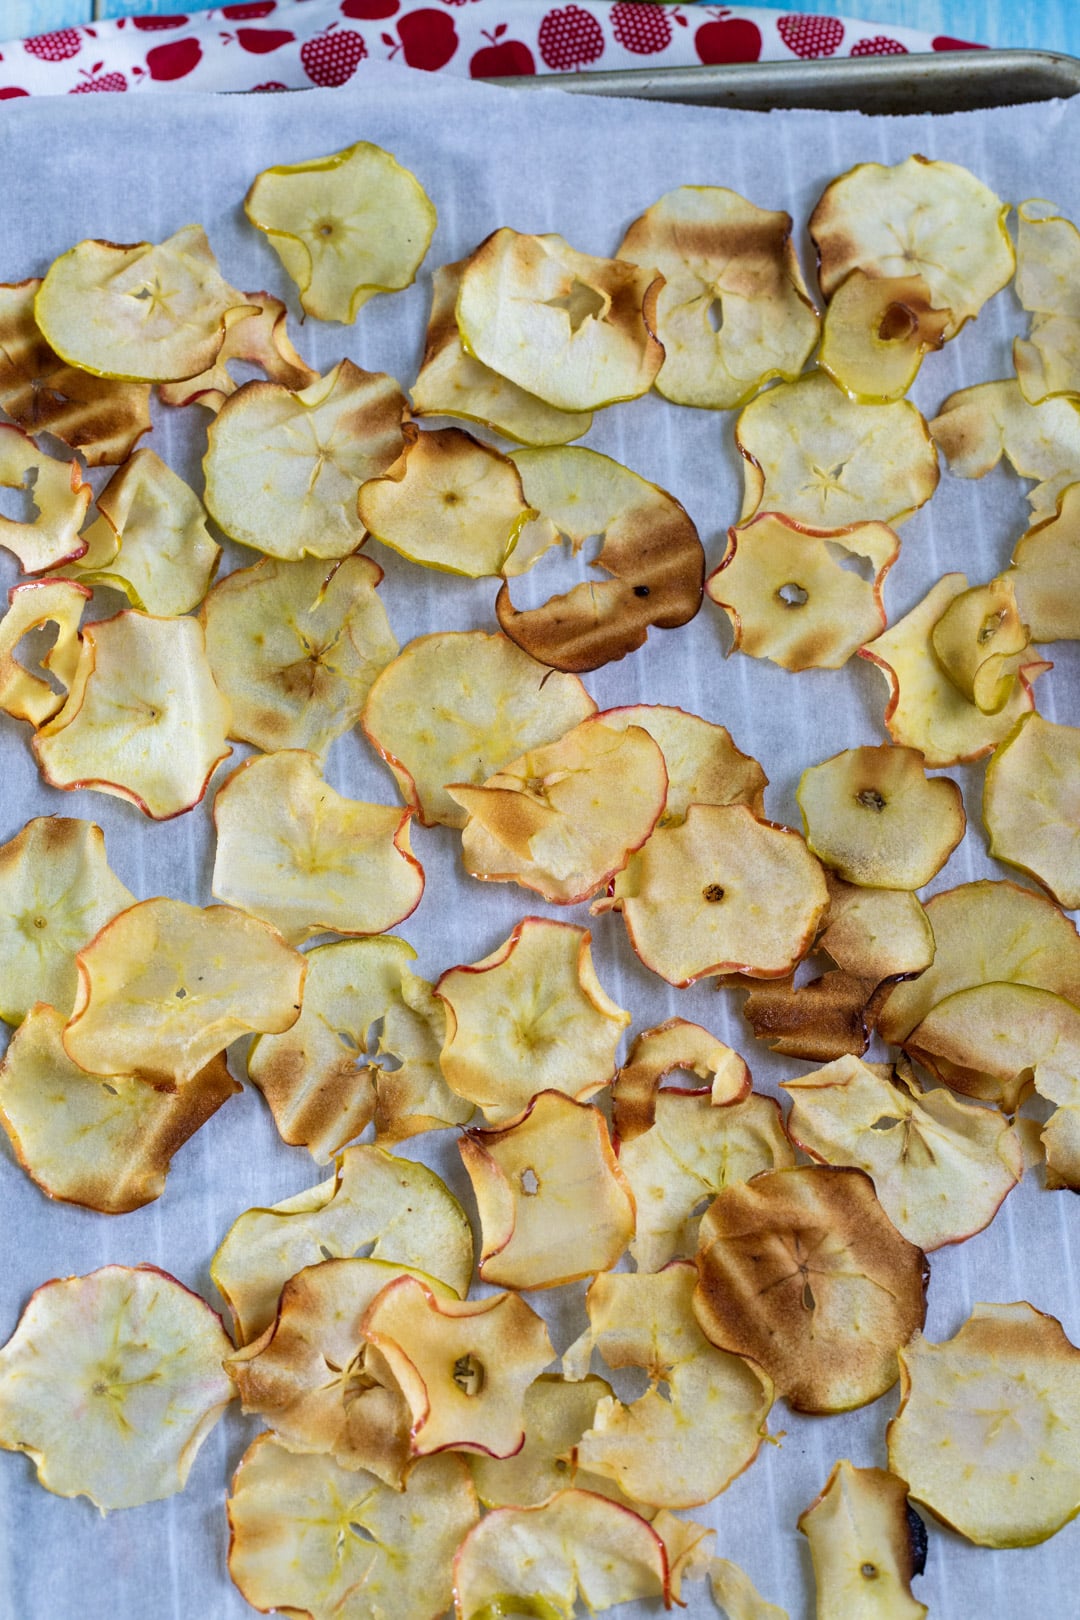 Cooked Apple chips on parchment paper-lined baking sheet.